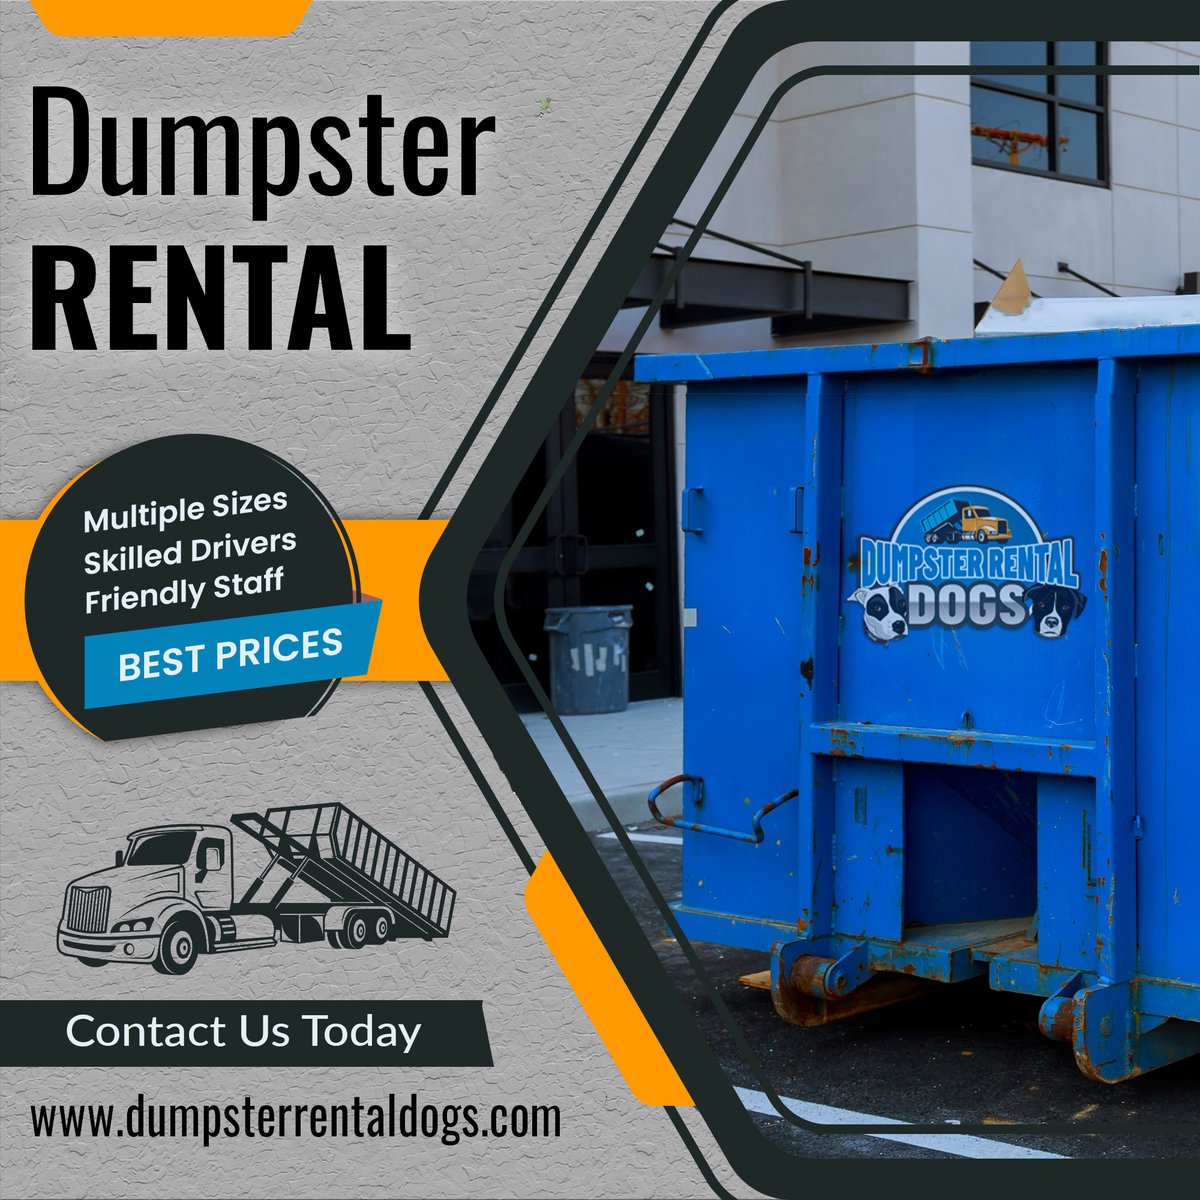 Need a dumpster for an extended period of time? No problem! Our flexible rental periods allow for long-term rentals. #longtermrentals #dumpsterrentals